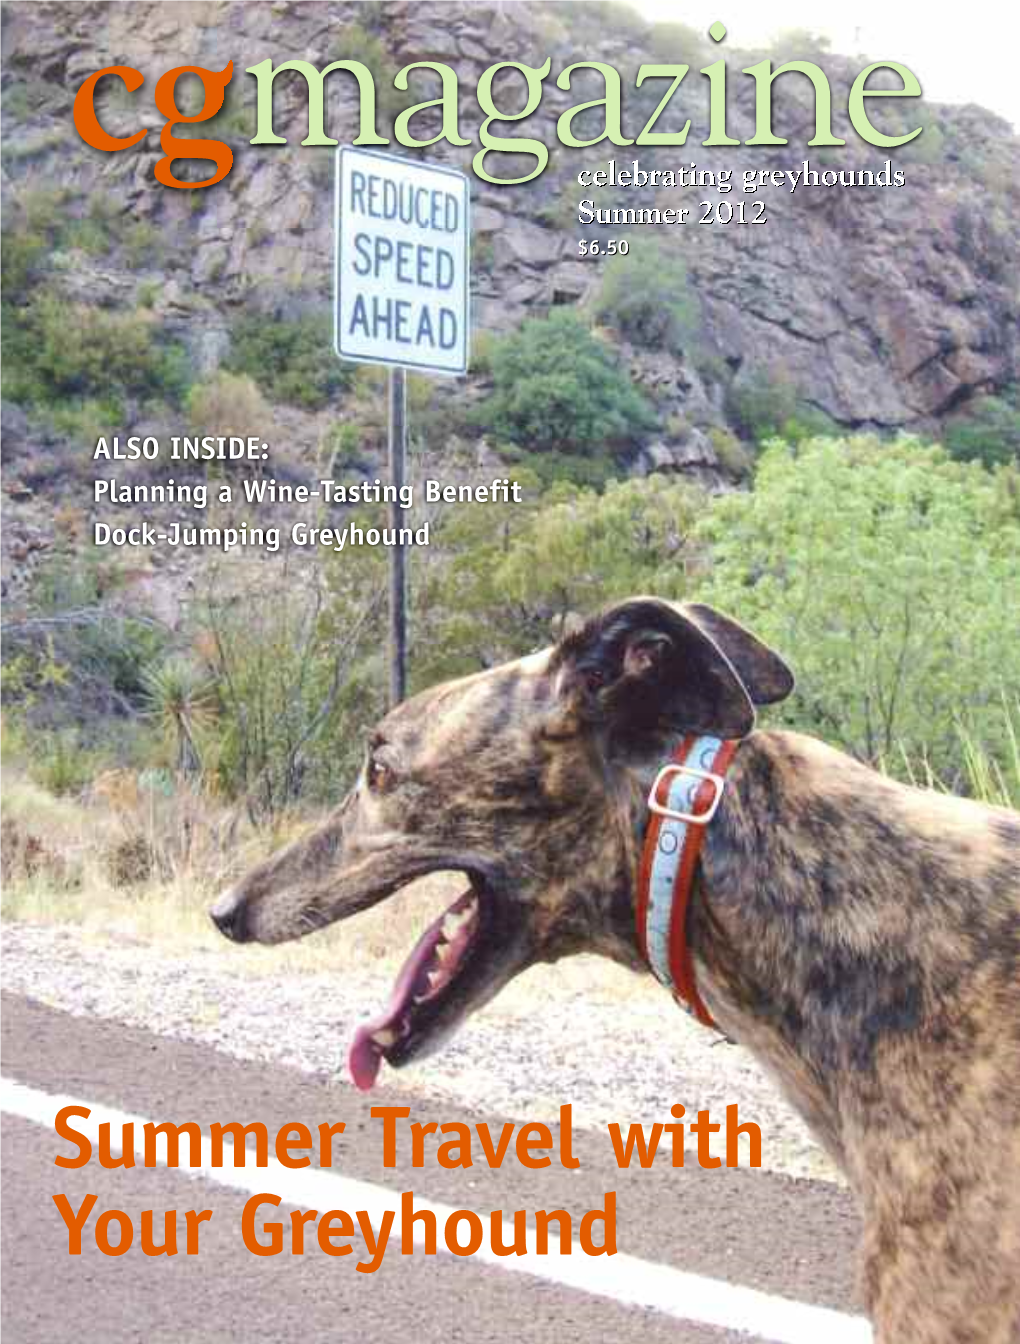 Summer Travel with Your Greyhound S T N E T N O C F O E L B a T